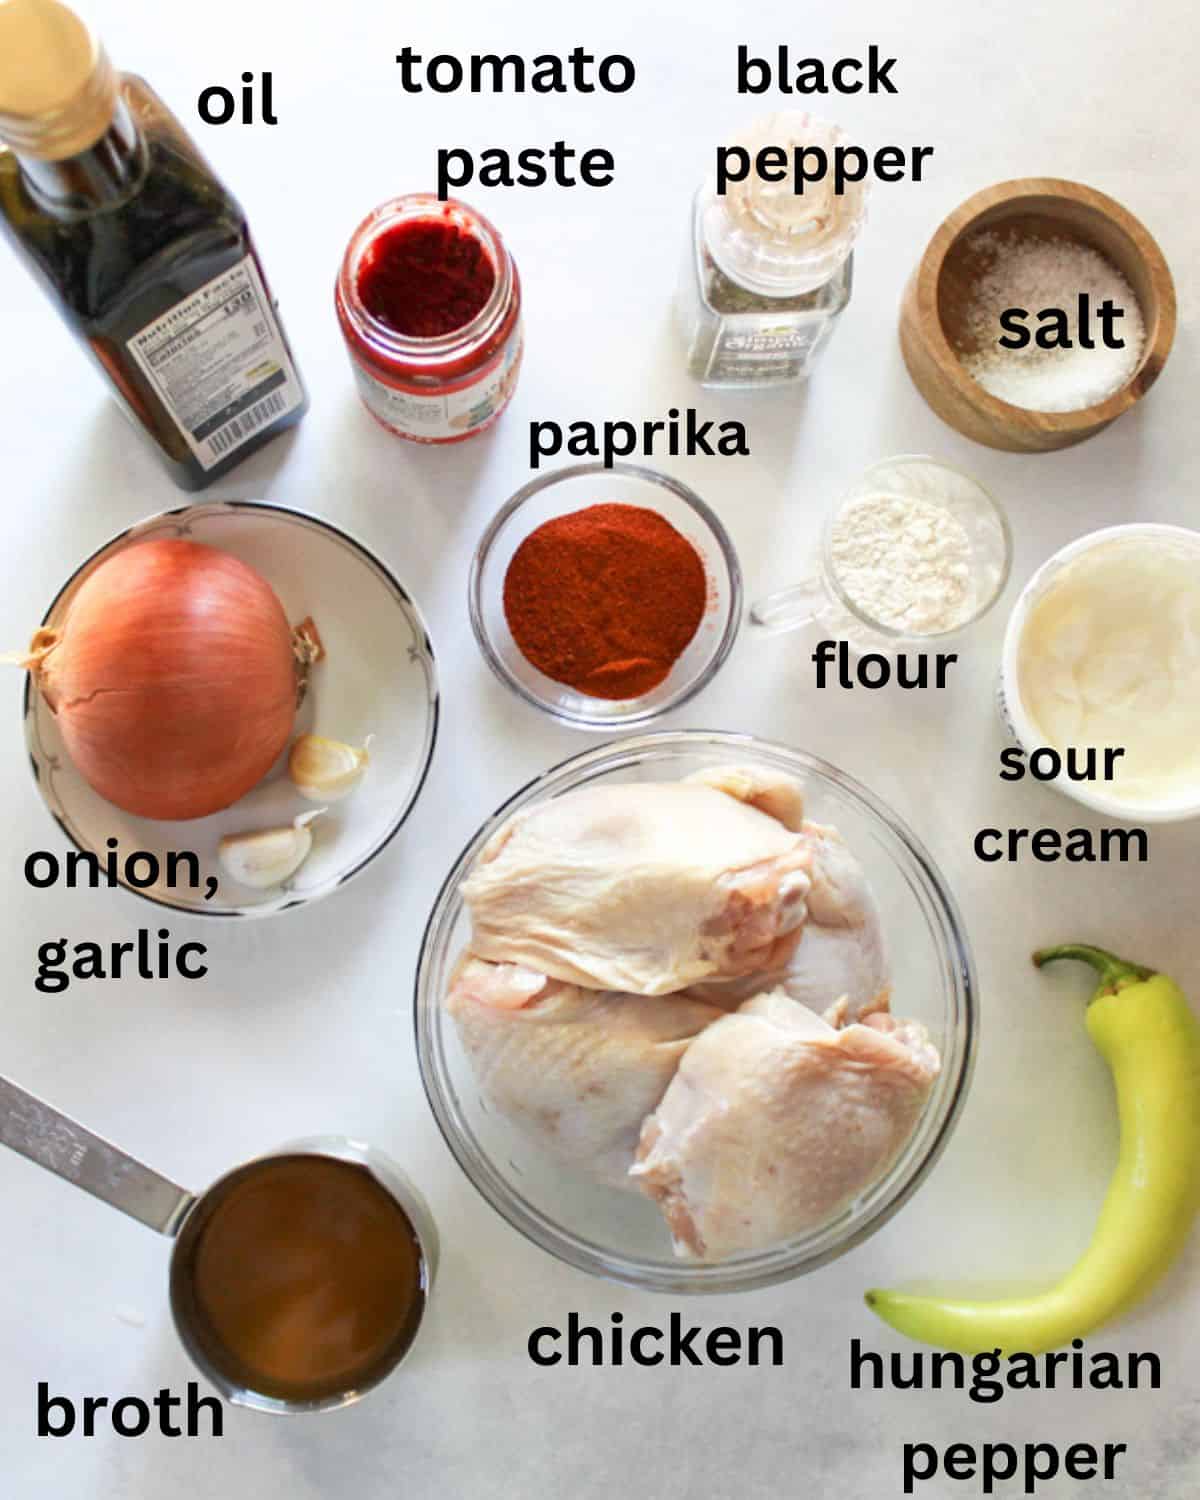 Recipe ingredients on a white background labeled as oil, tomato pasta. black pepper, salt, onion, garlic, paprika, flour, sour cream, broth. chicken, Hungarian pepper.